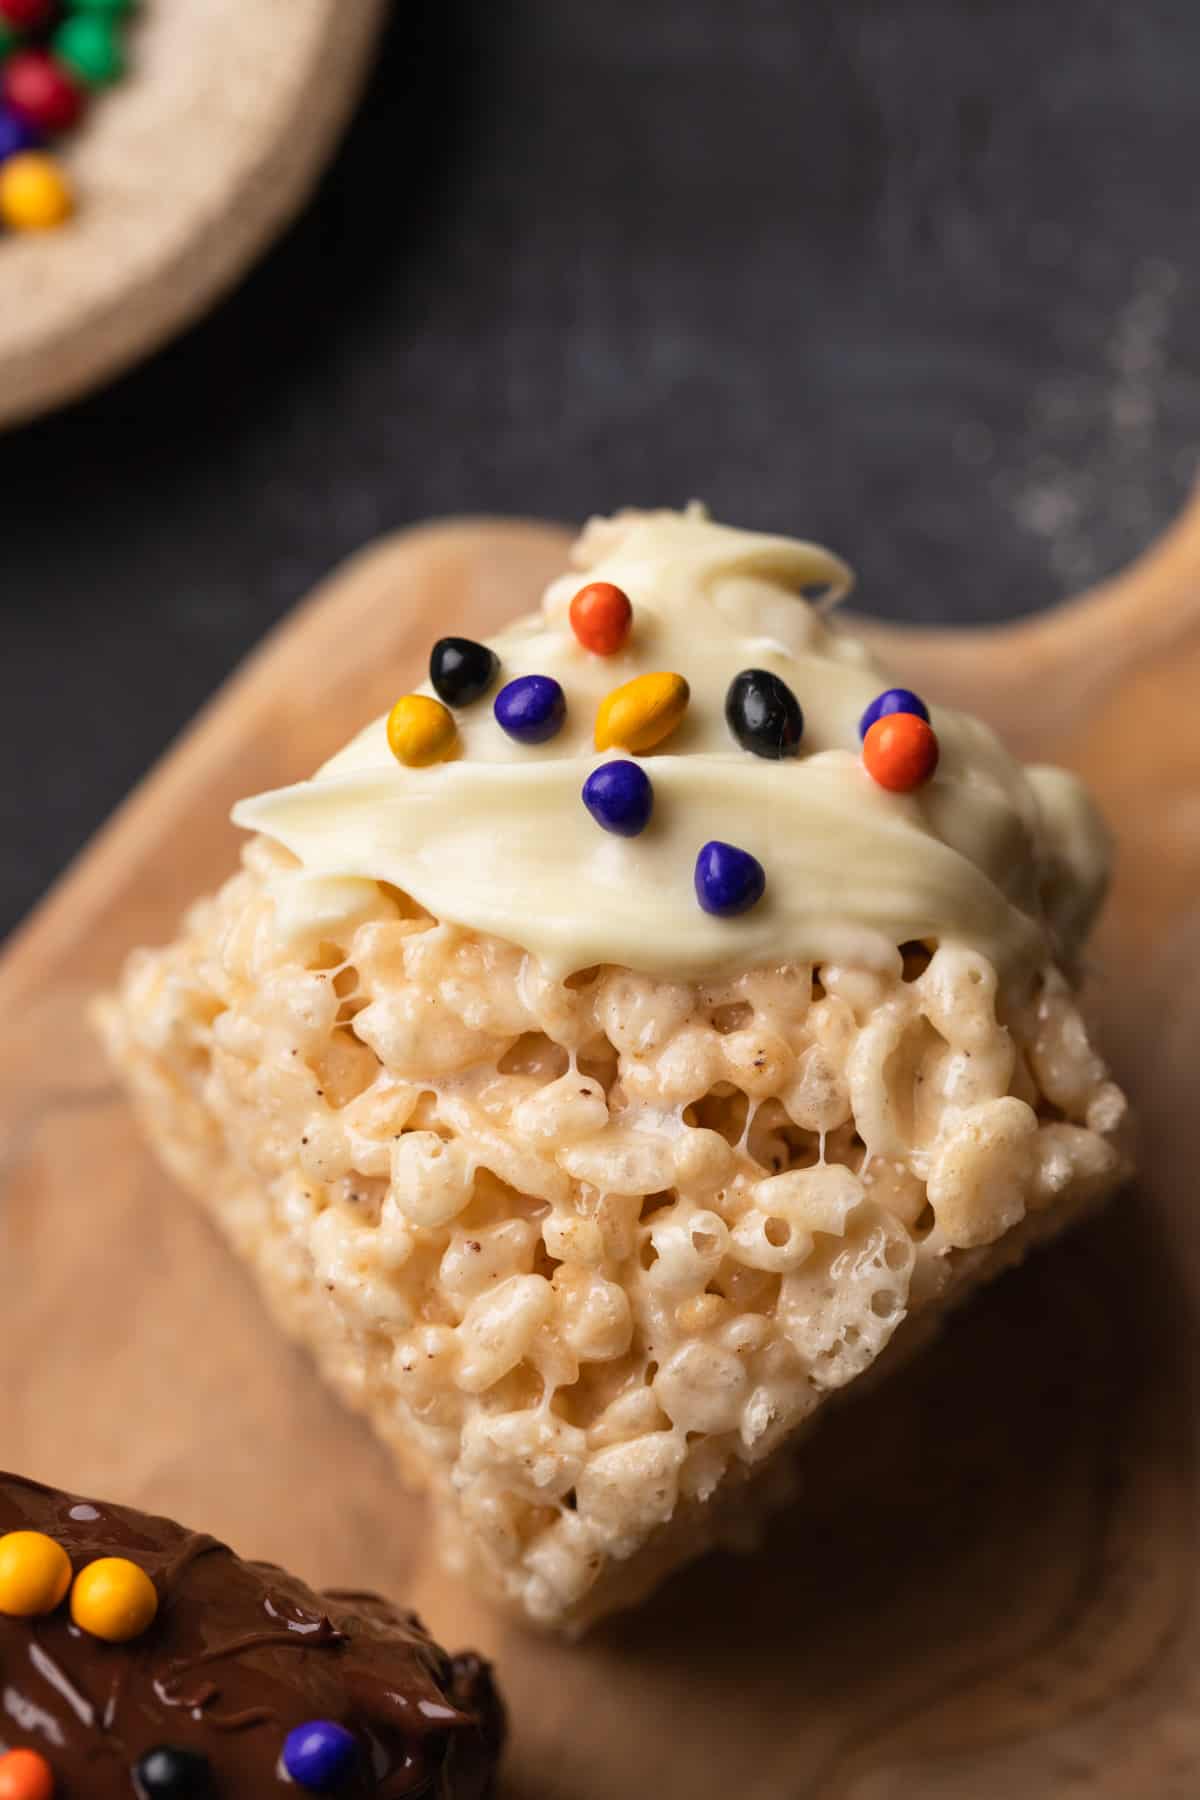 A close up of a Rice Krispie treat with white chocolate and sprinkles on a wooden board.